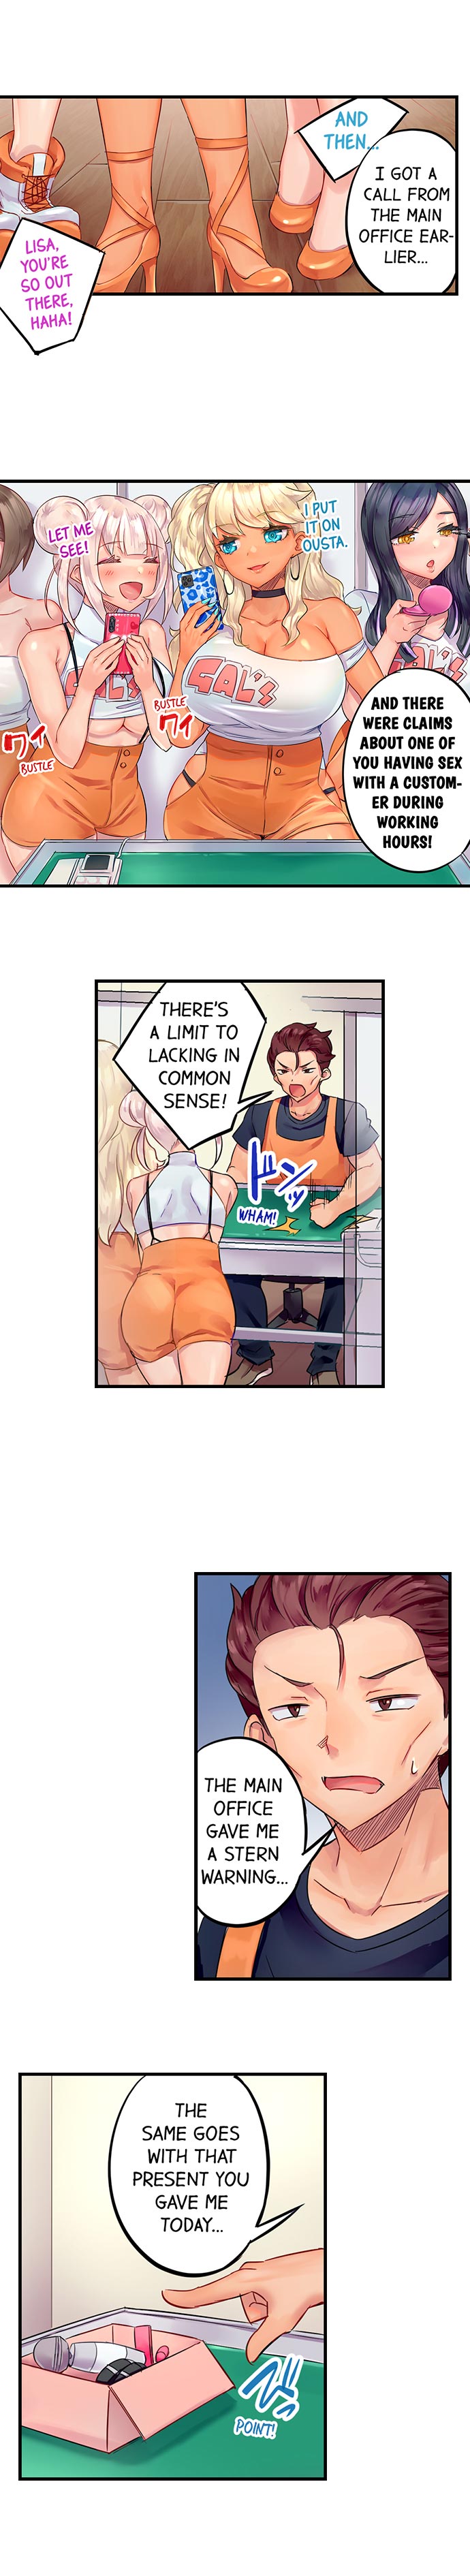 Orgasm Management for This Tanned Girl - Chapter 1 Page 6